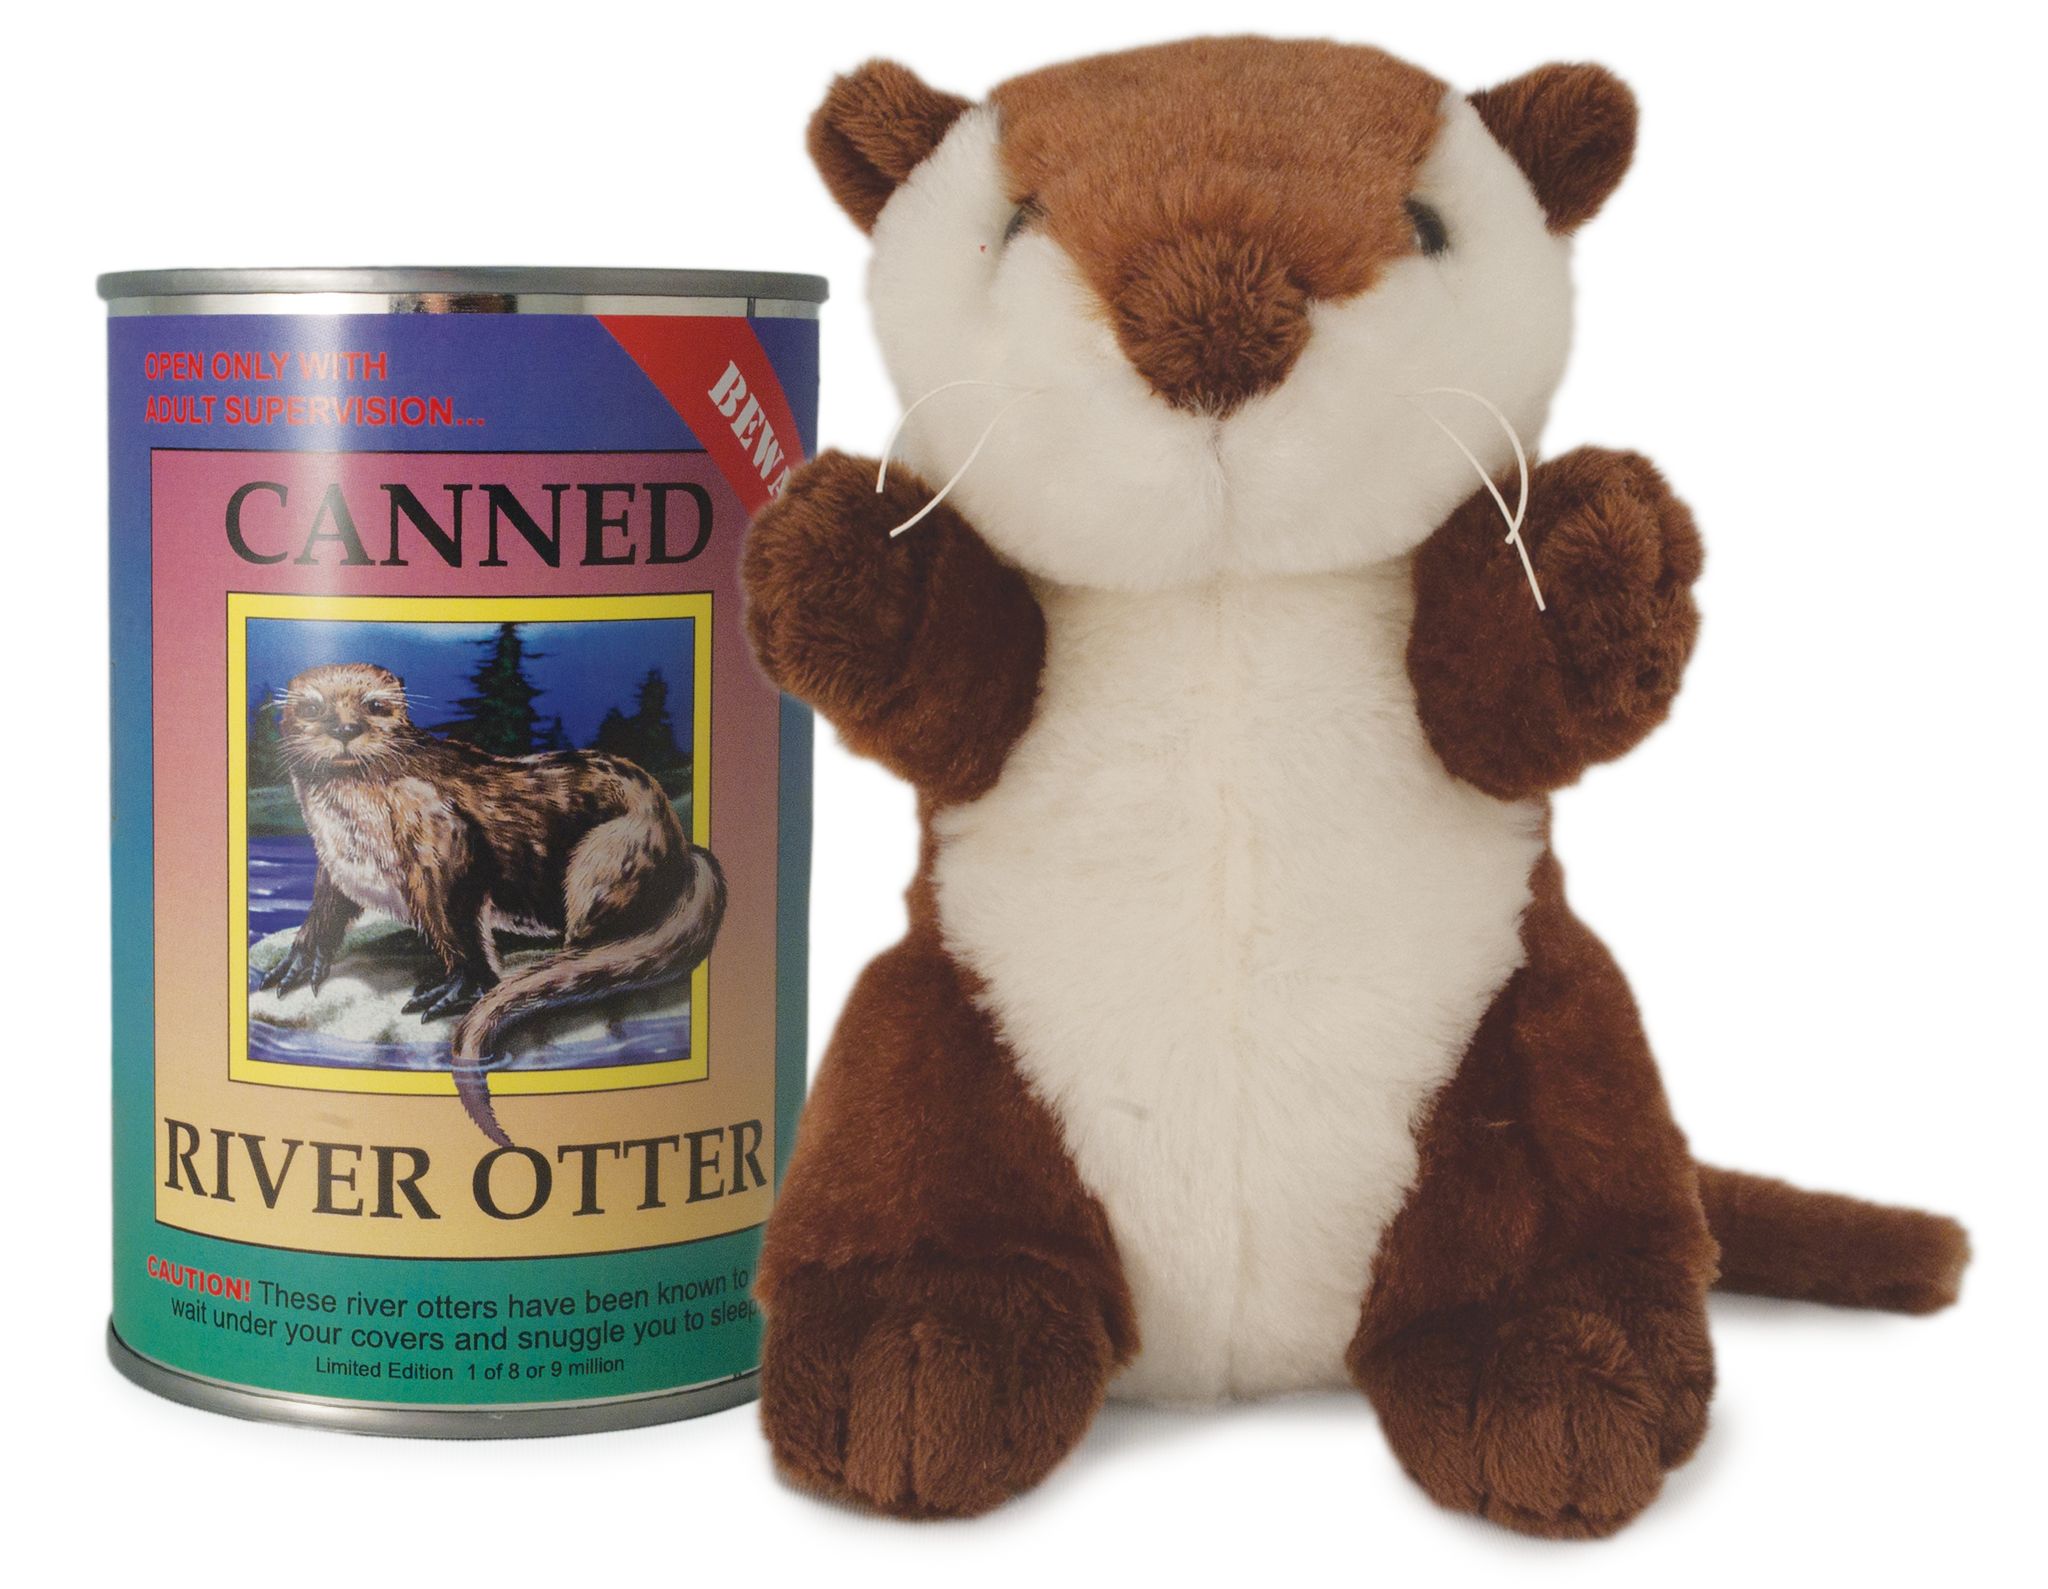 6 Canned Yeti – Canned Critters